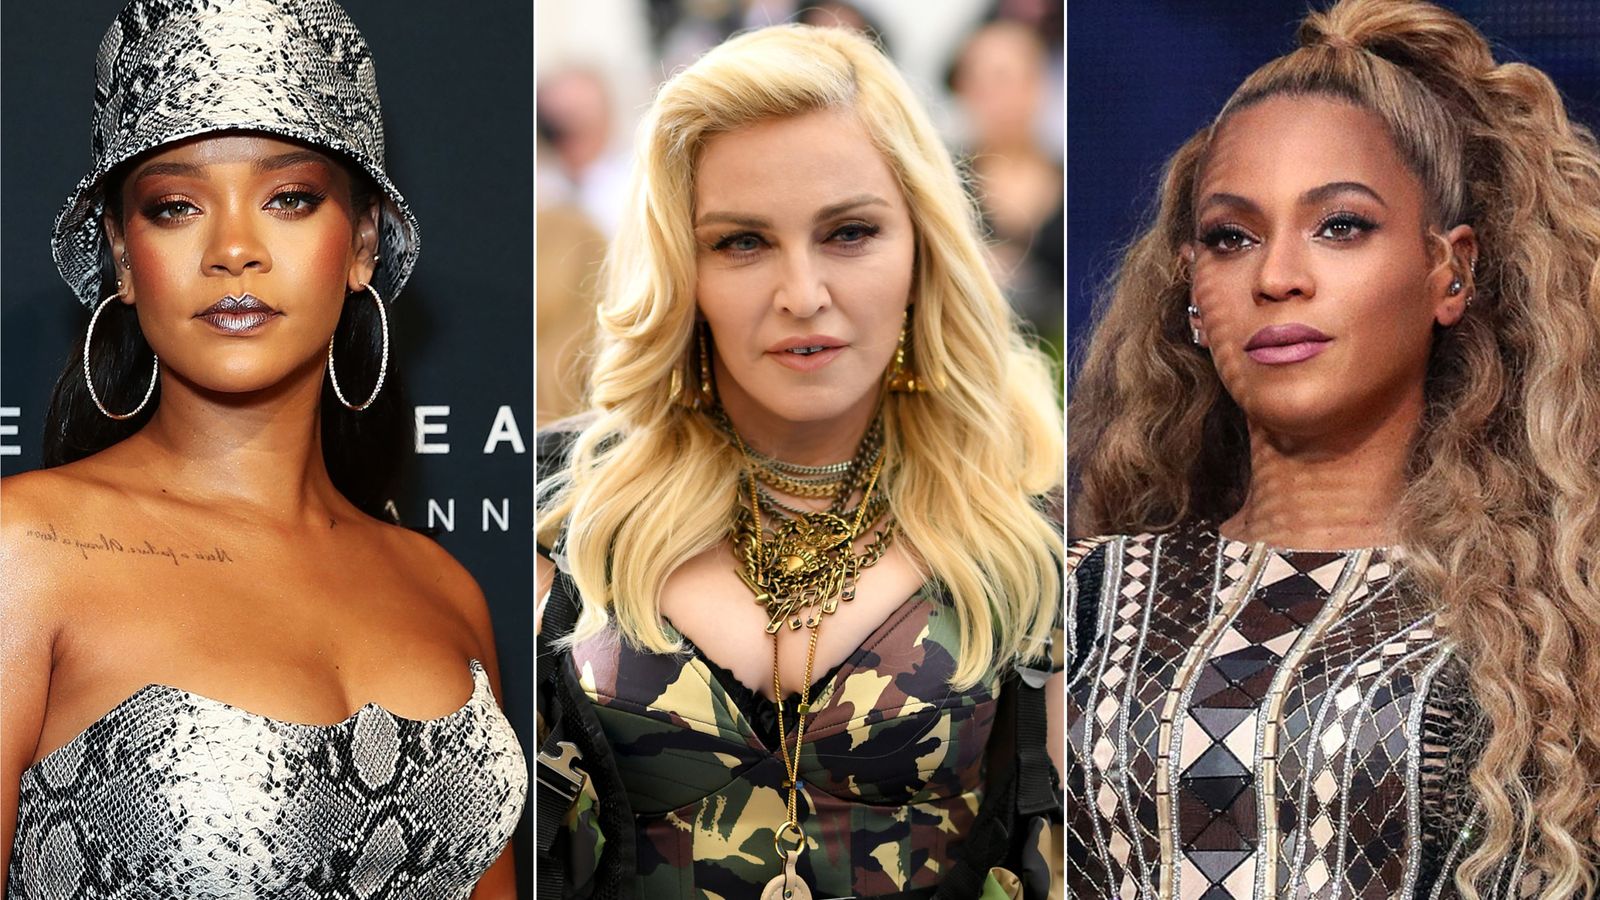 Rihanna Beyonce Or Madonna Forbes Names World S Richest Female Musician Ents Arts News Sky News